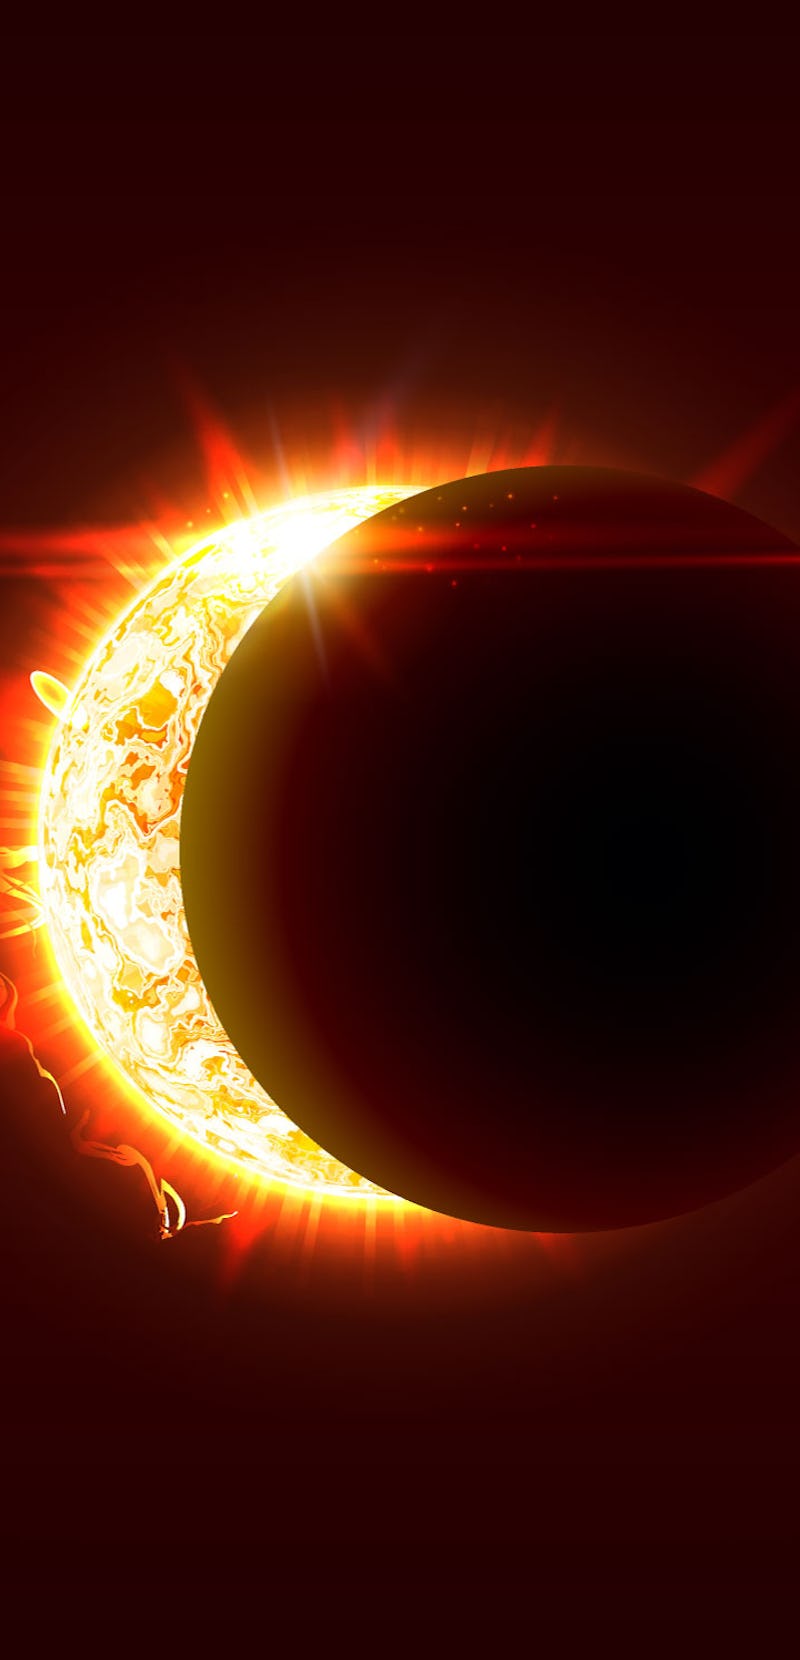 Sun eclipse, total and partial solar eclipse, several phases. Sun, moon and earth are nearly aligned...